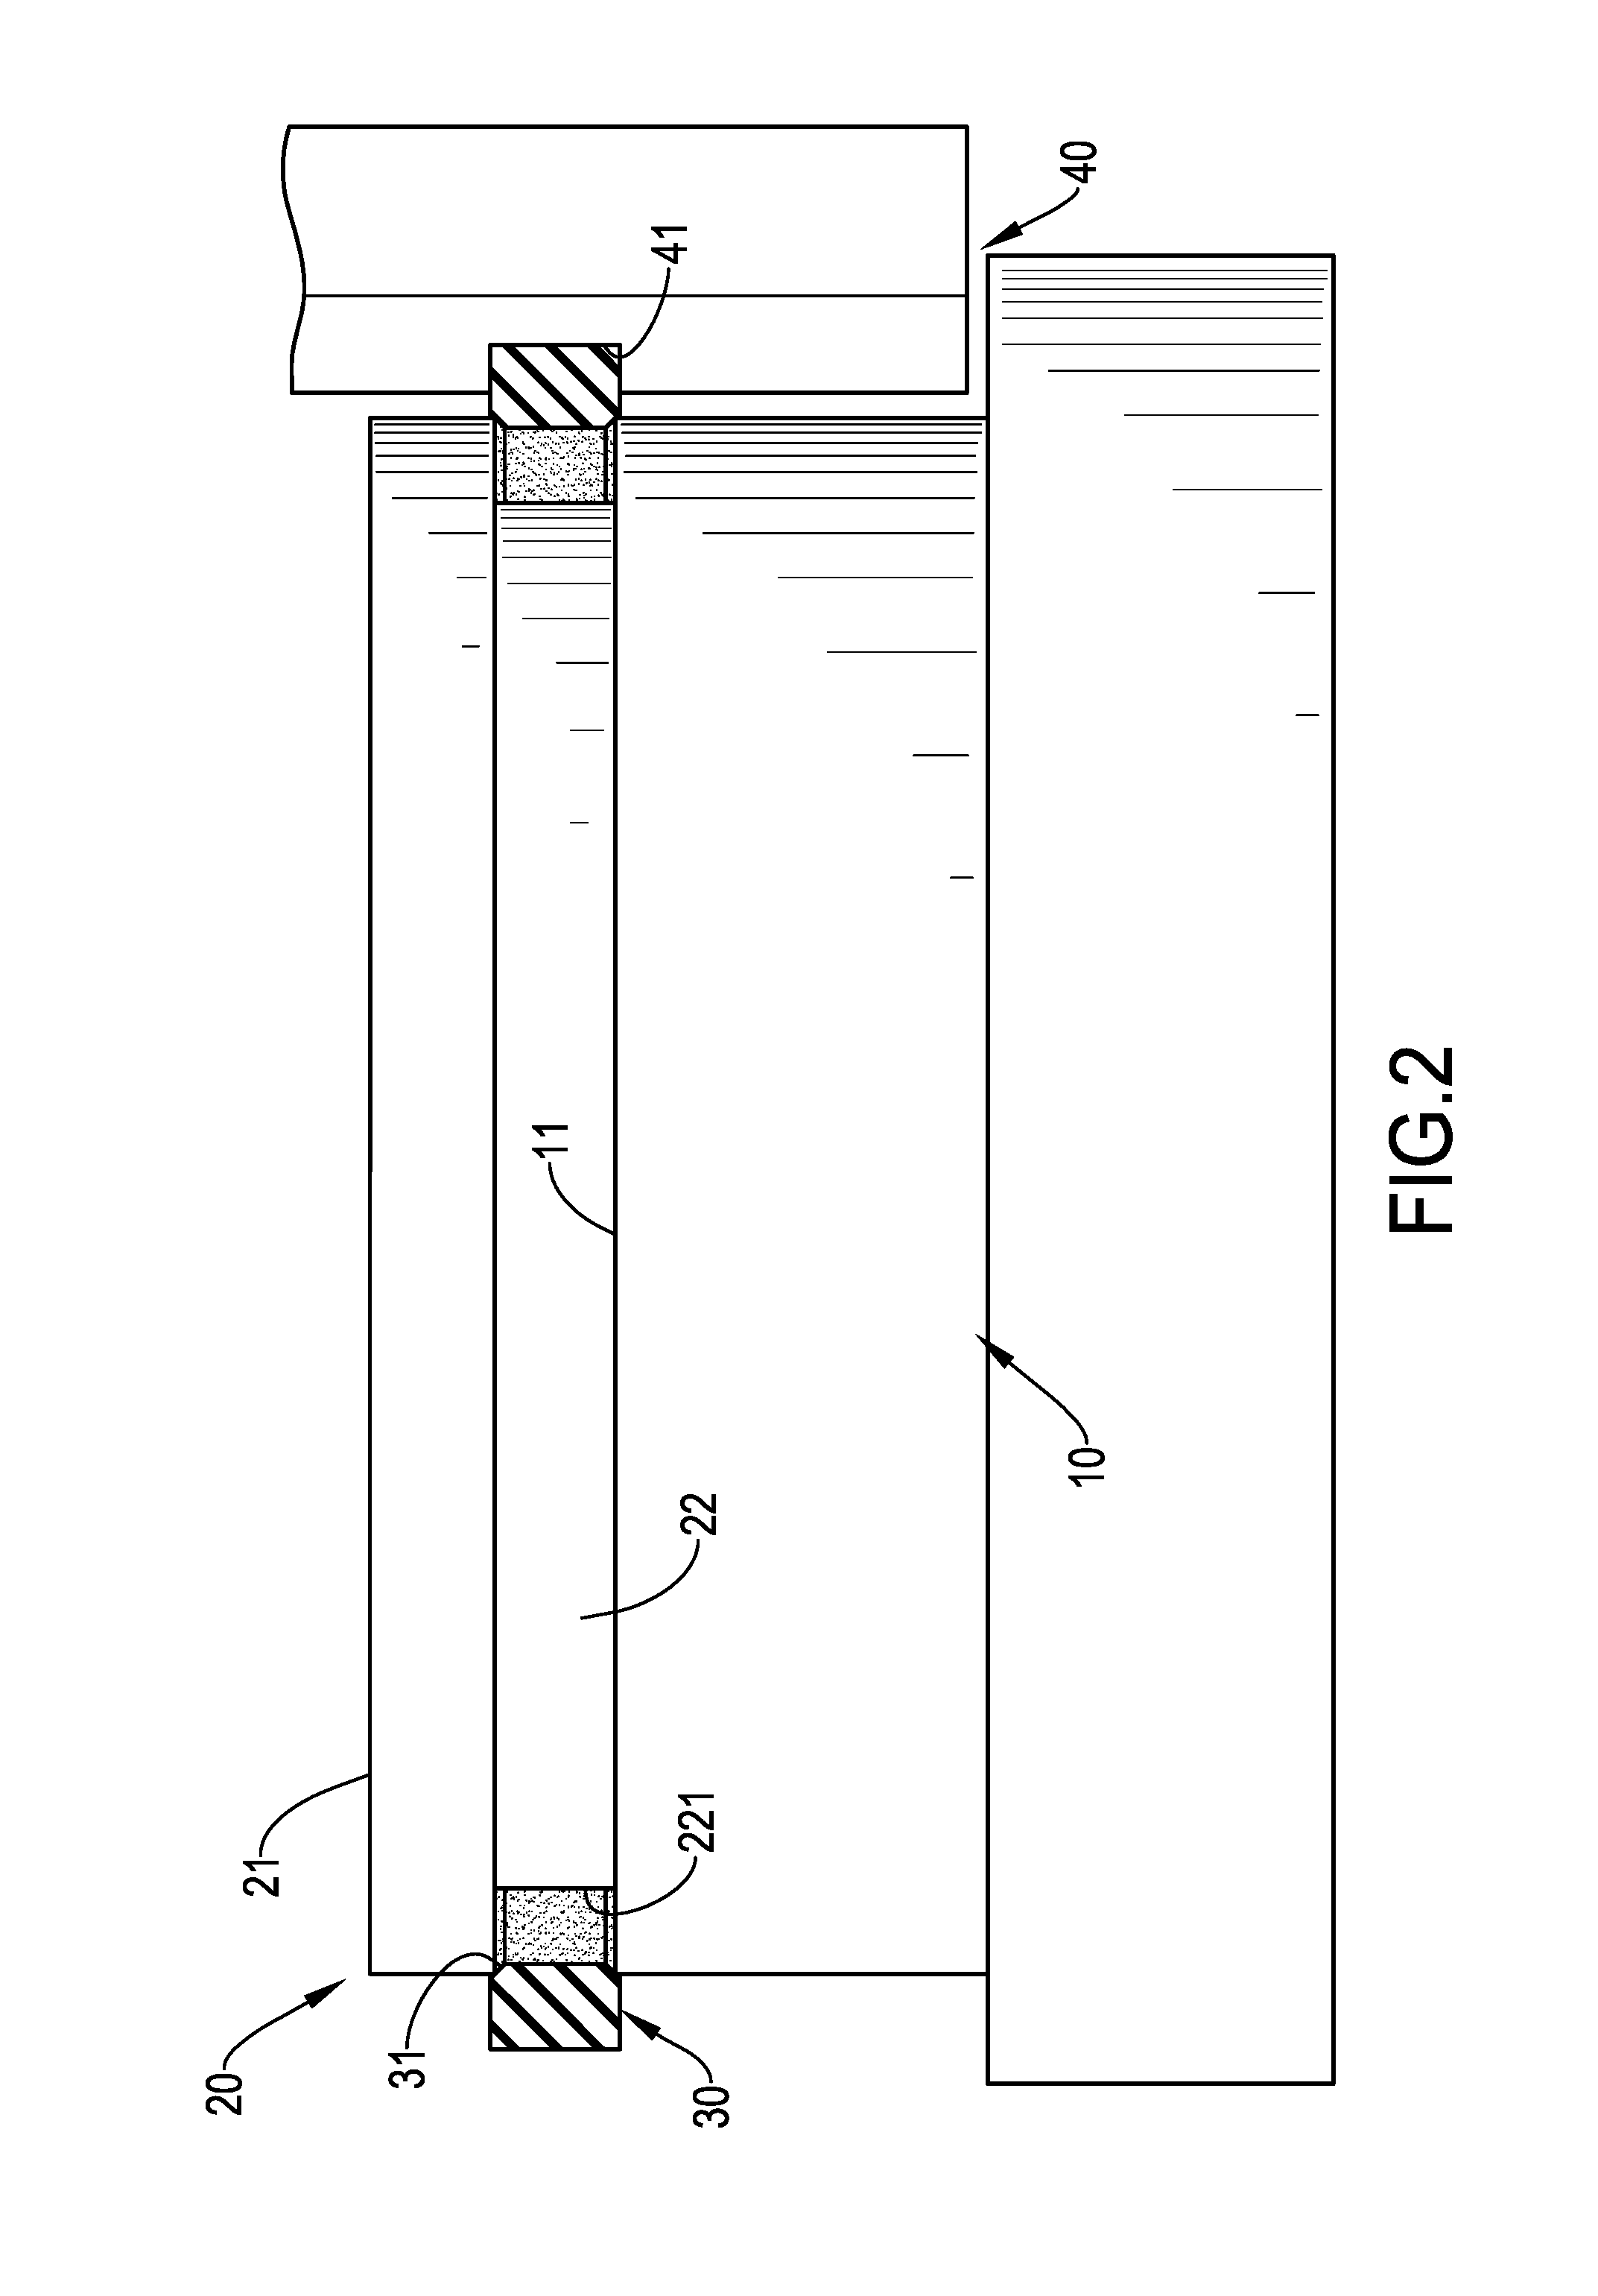 Method of installing elastomer ring in semiconductor processing equipment and guiding sheet and jig used in installing elastomer ring